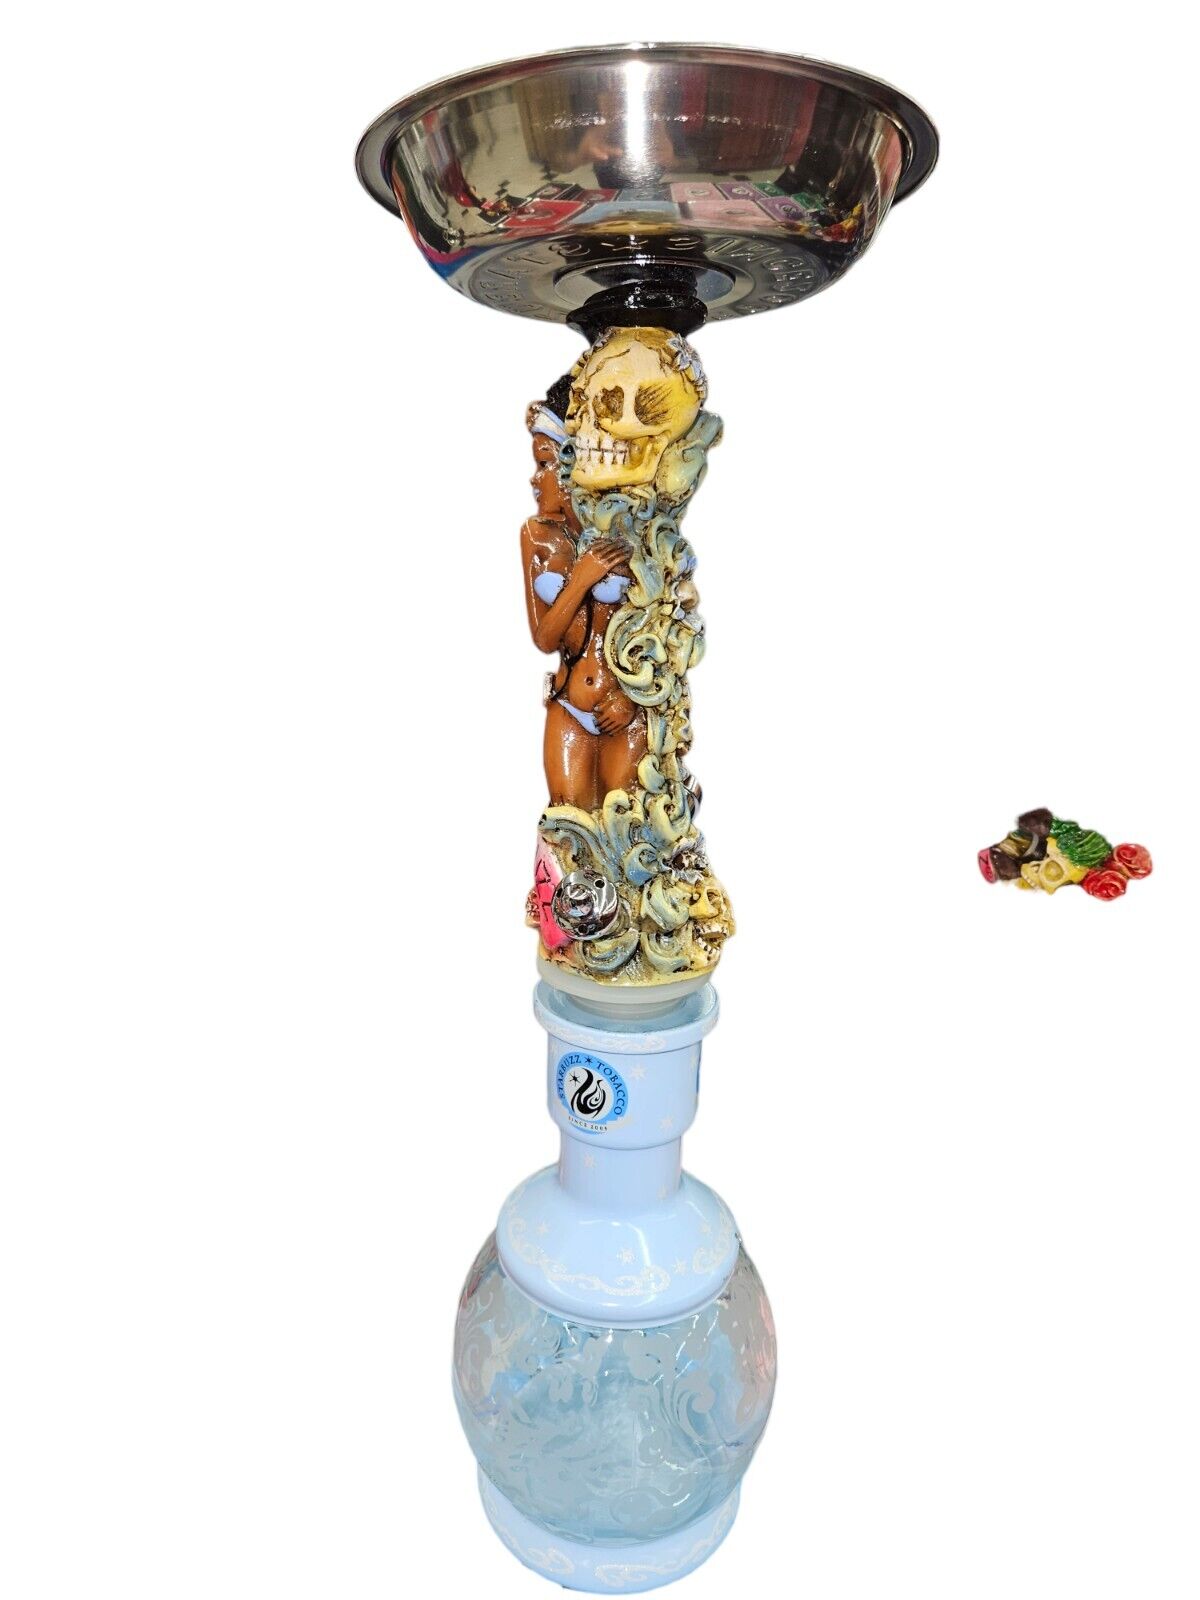 100%Authentic Starbuzz Sexy Lady Hookah TableTop Hookah Complete Set-blue W/case